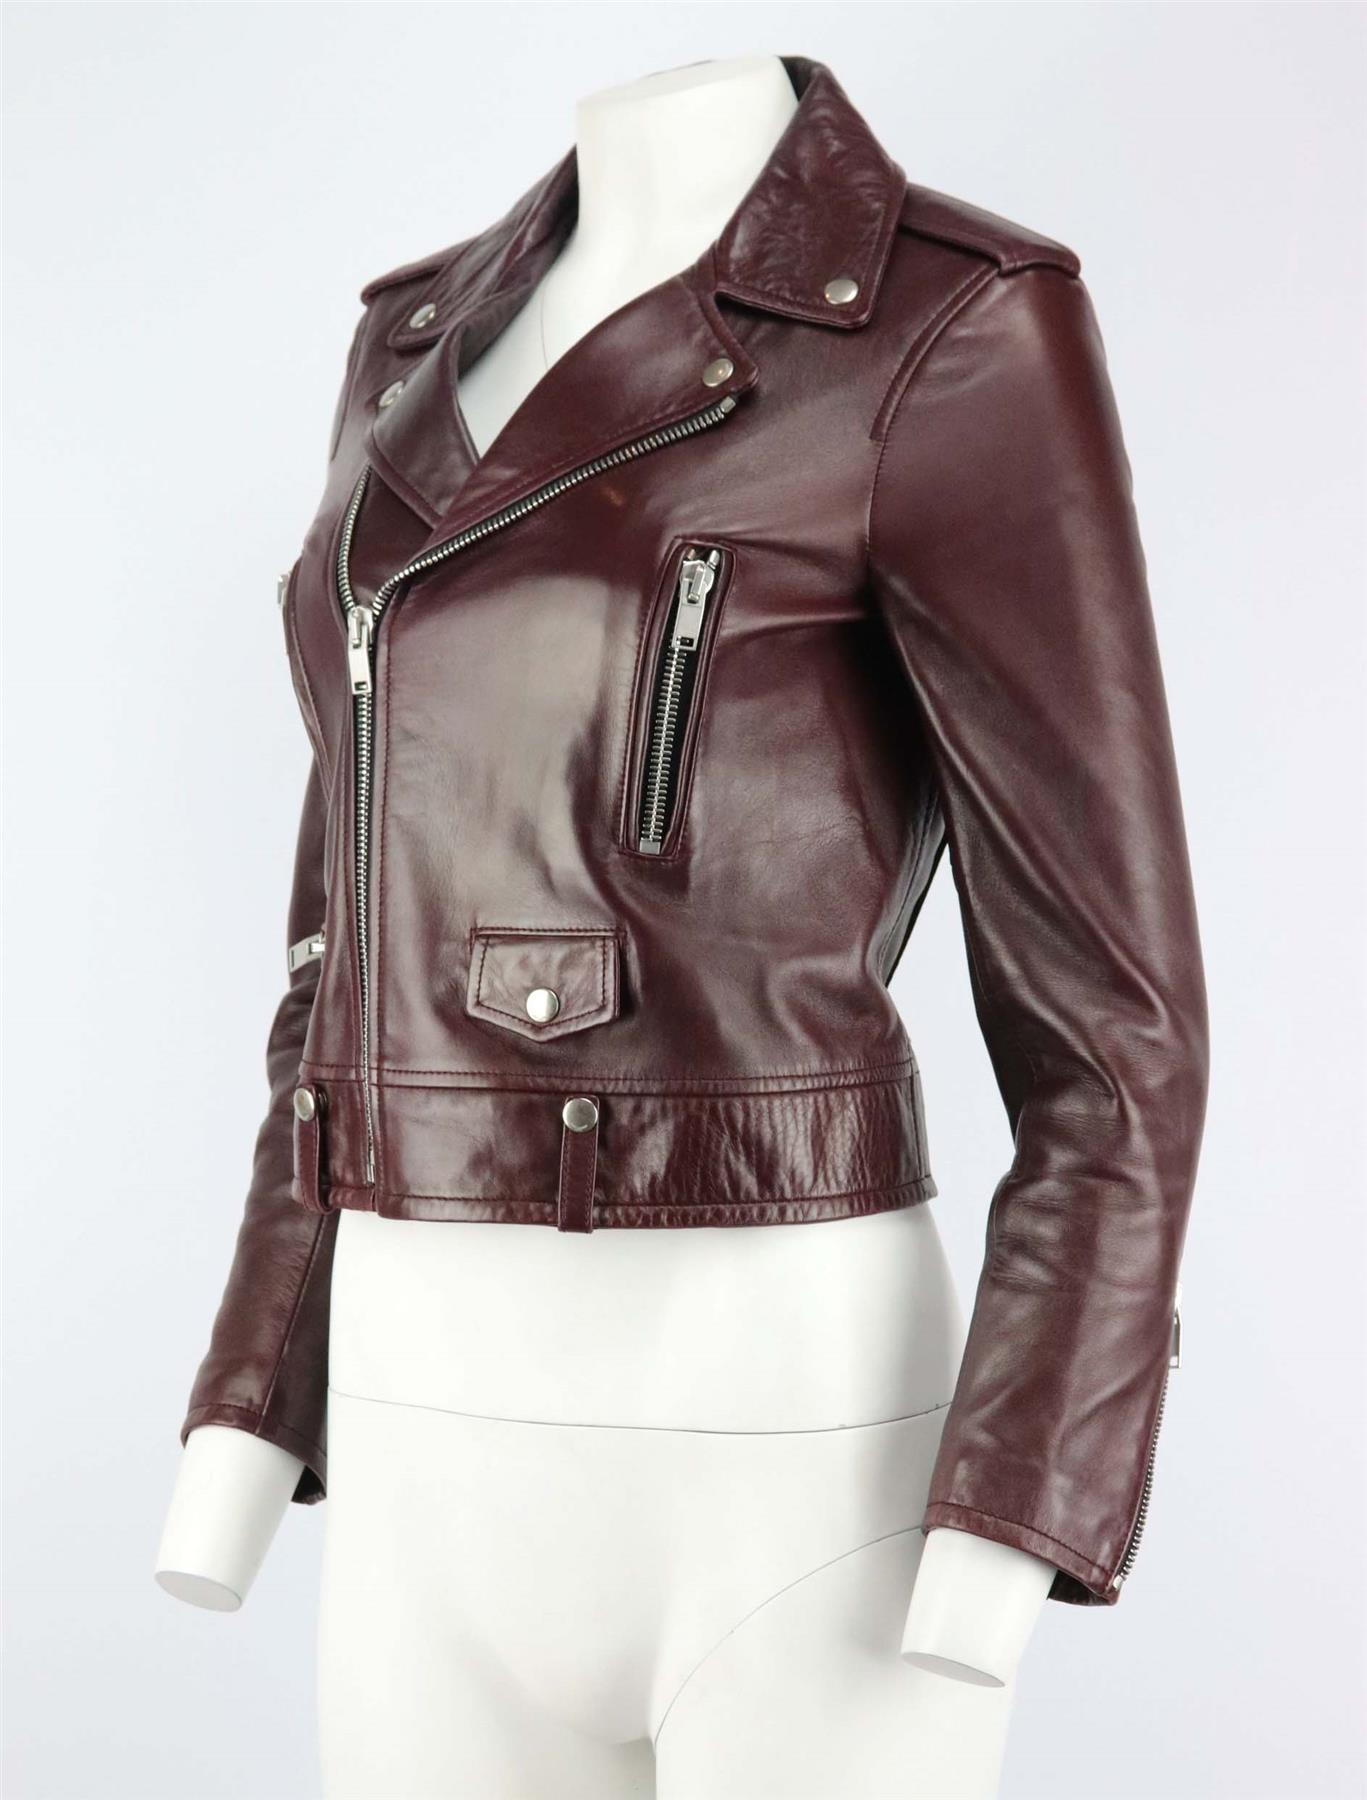 This jacket by Saint Laurent is a cool iteration has been crafted in Italy from burgundy leather and cut for a slim fit, it has all the signature details you would expect, like epaulets and zipped cuffs. Burgundy leather (Lambs). Asymmetric zip